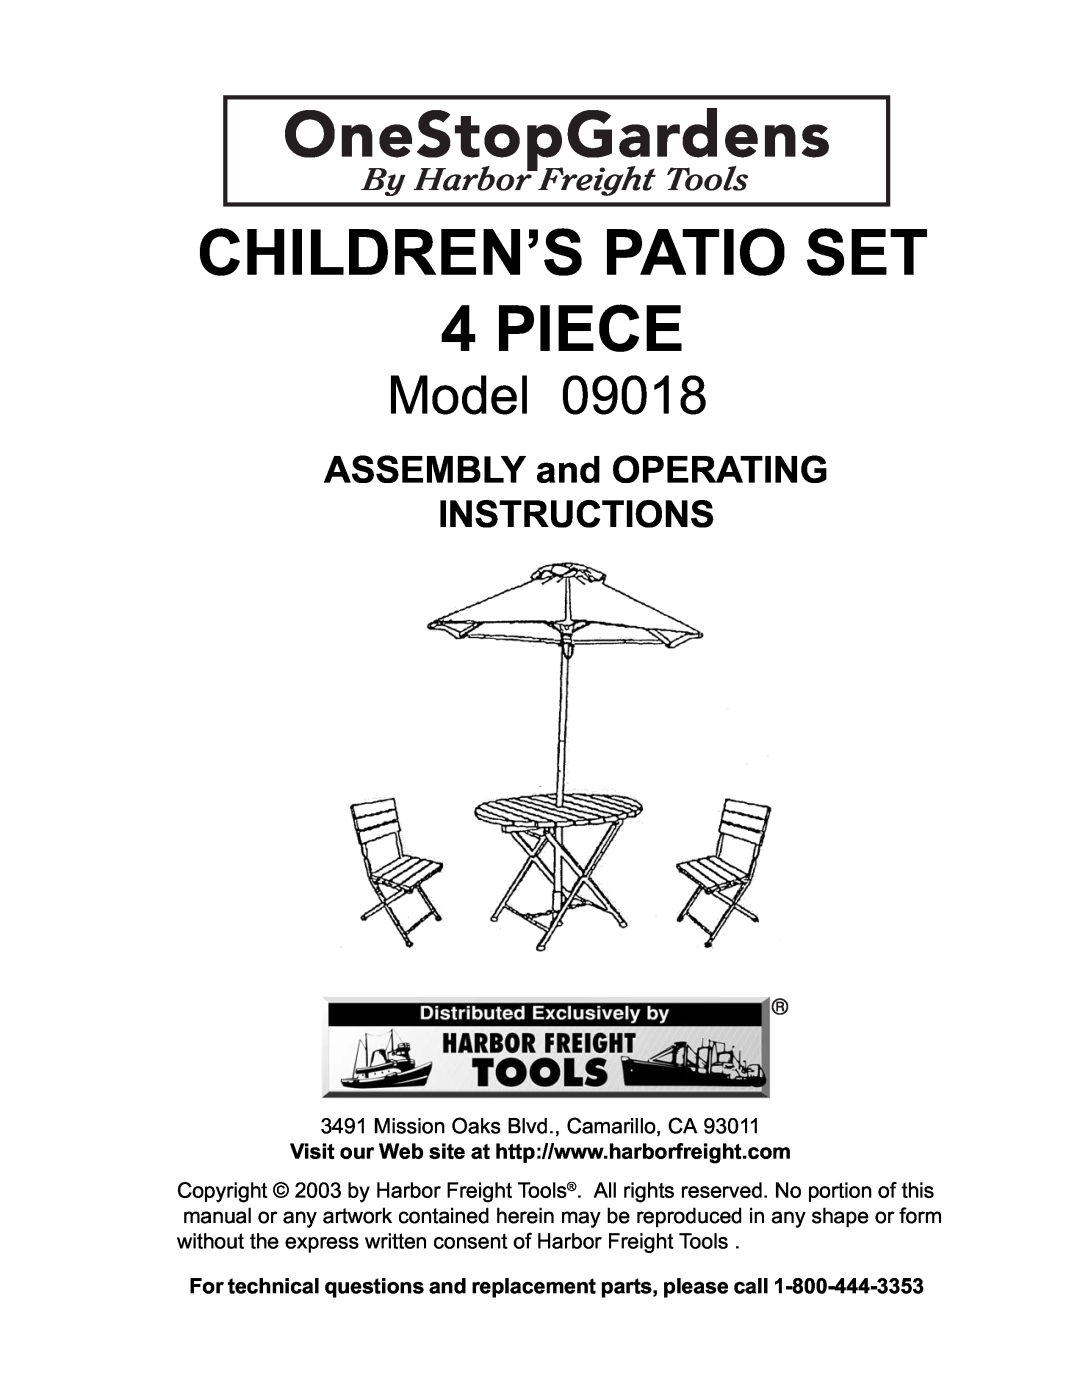 Harbor Freight Tools 9018 manual CHILDREN’S PATIO SET 4 PIECE, Model, ASSEMBLY and OPERATING INSTRUCTIONS 